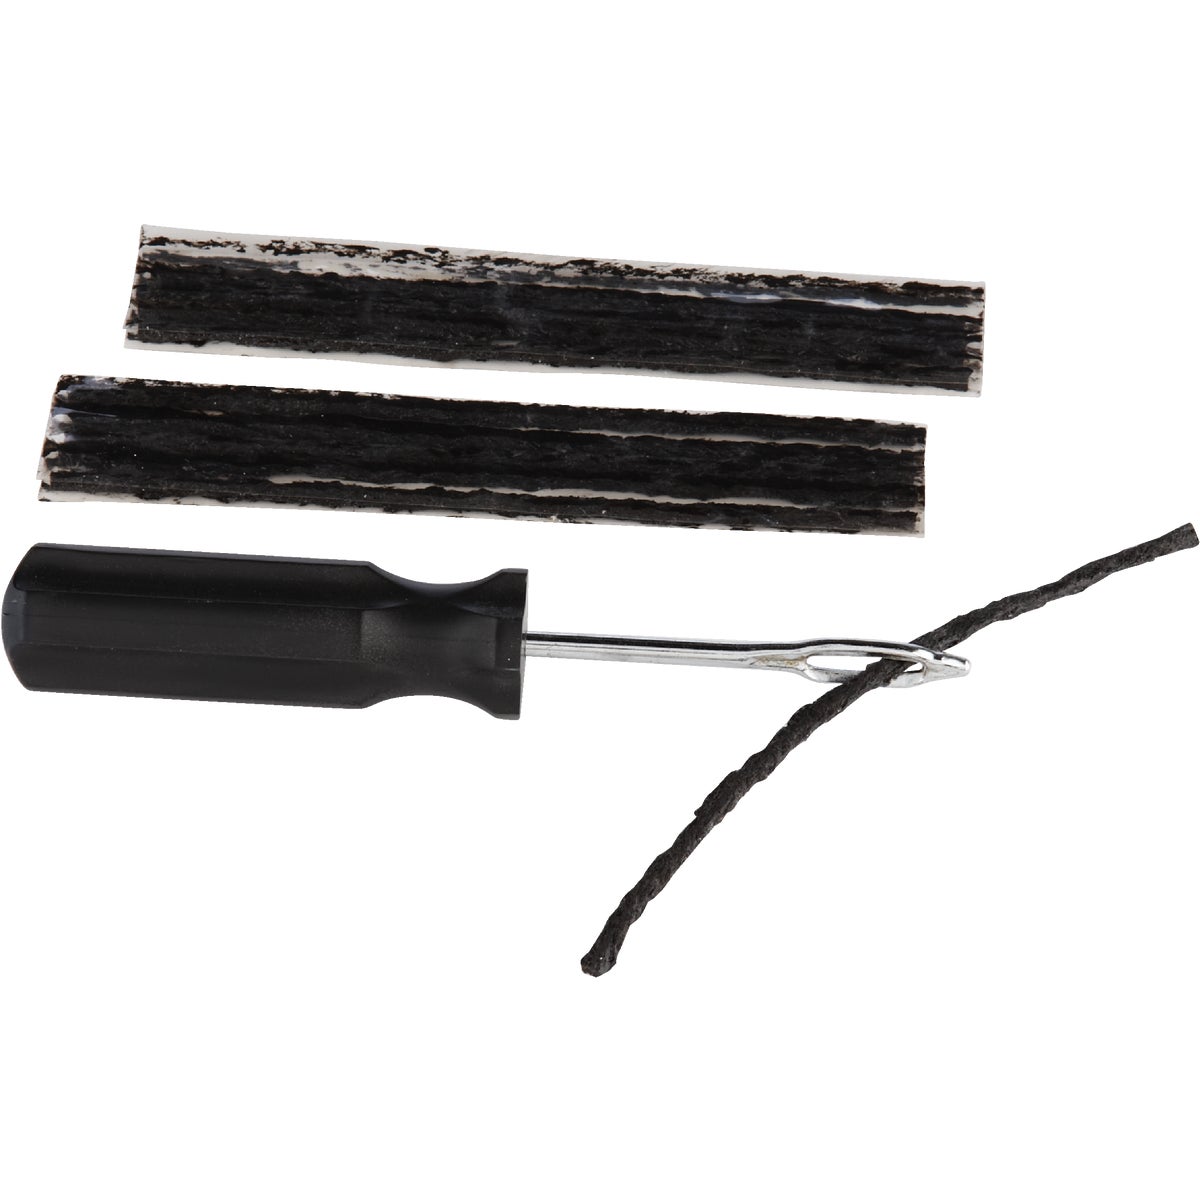 Item 579041, This handy tire repair kit easily fits in the glove box of any car.